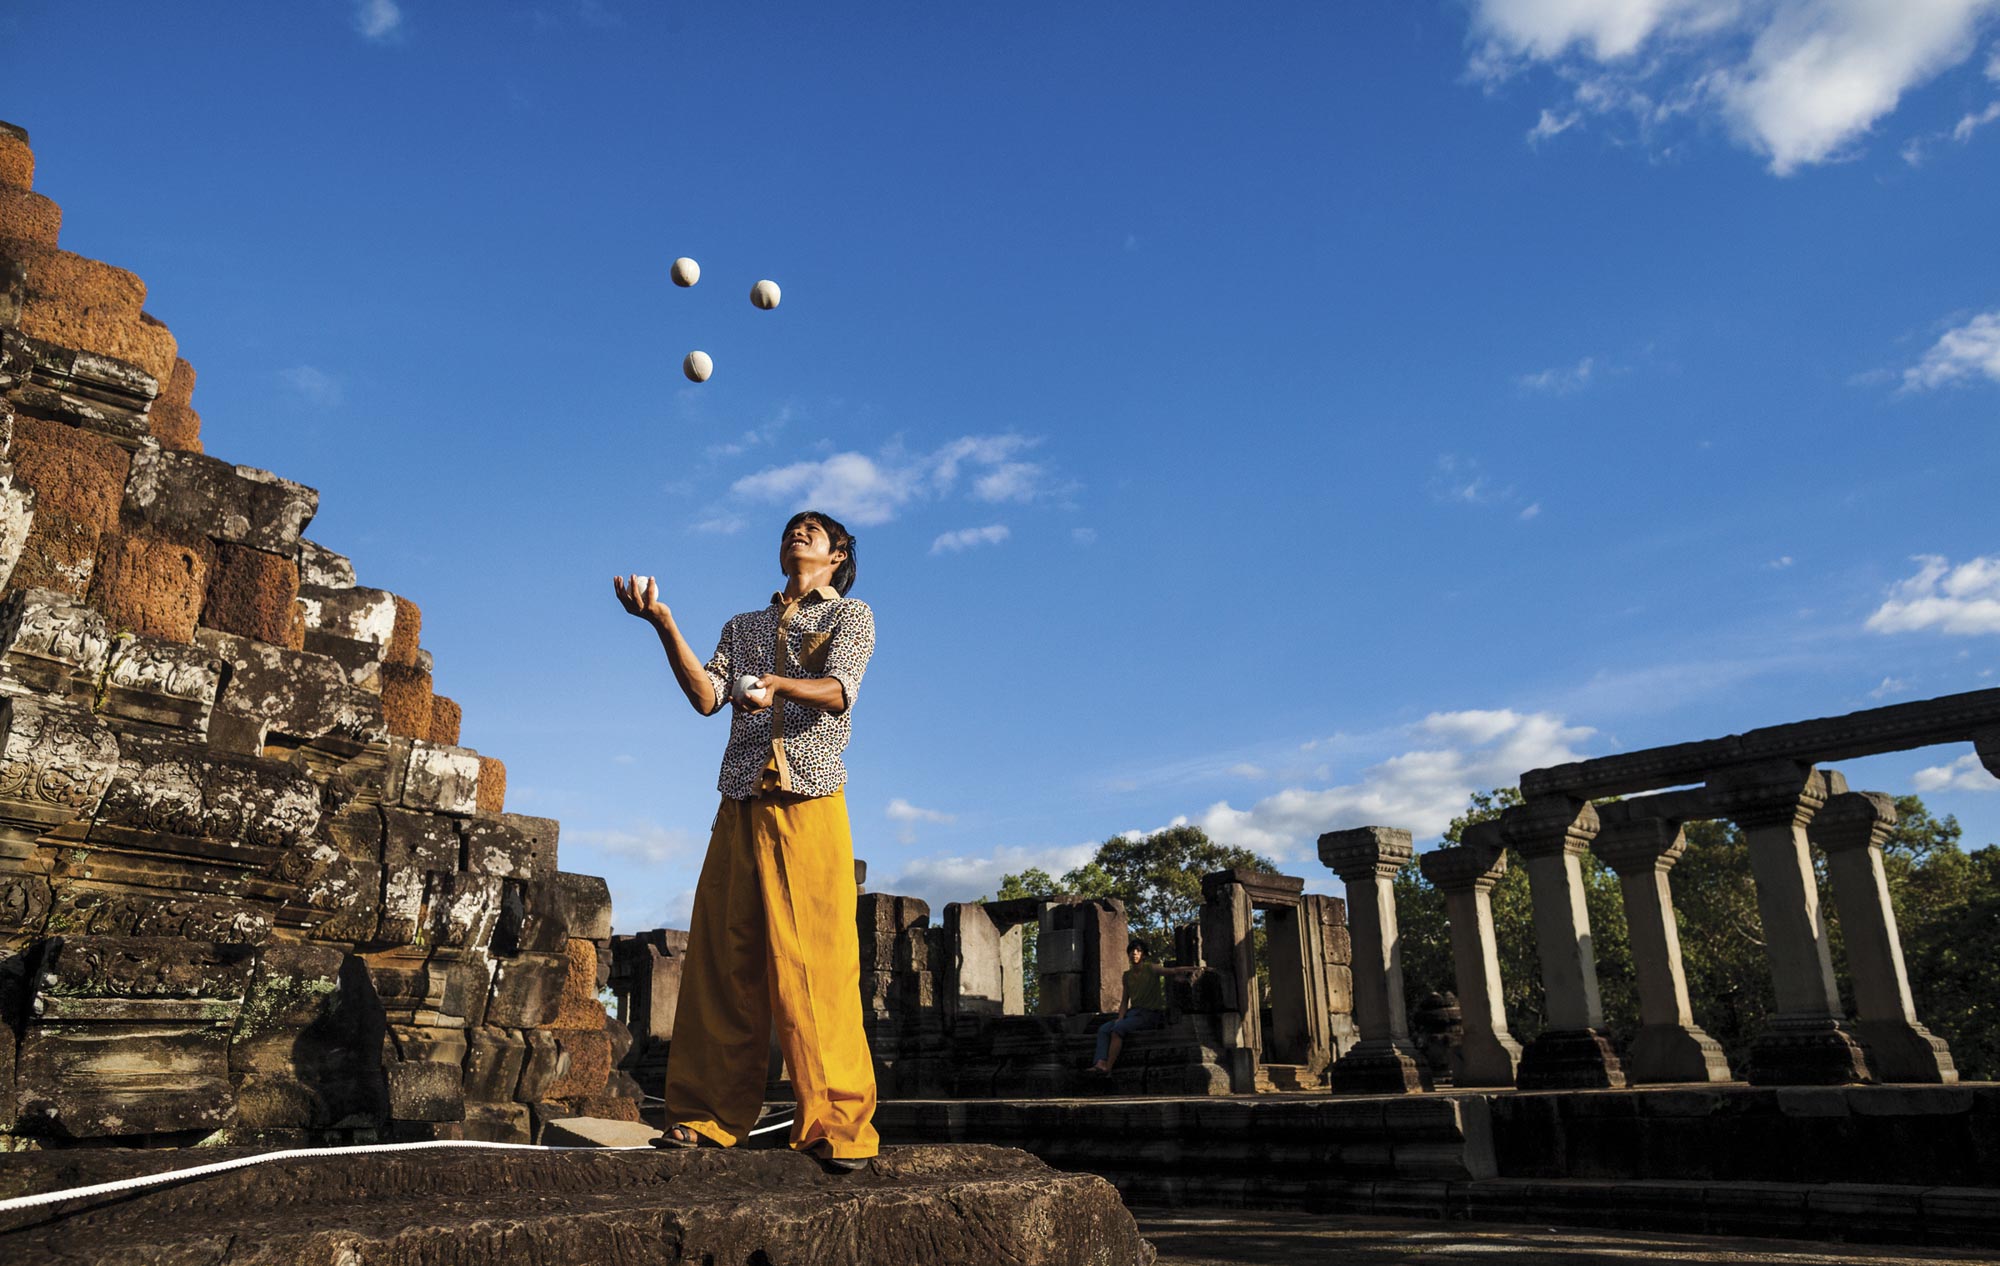 Viban juggling outside of the temples of Angkor Wat in Siem Reap